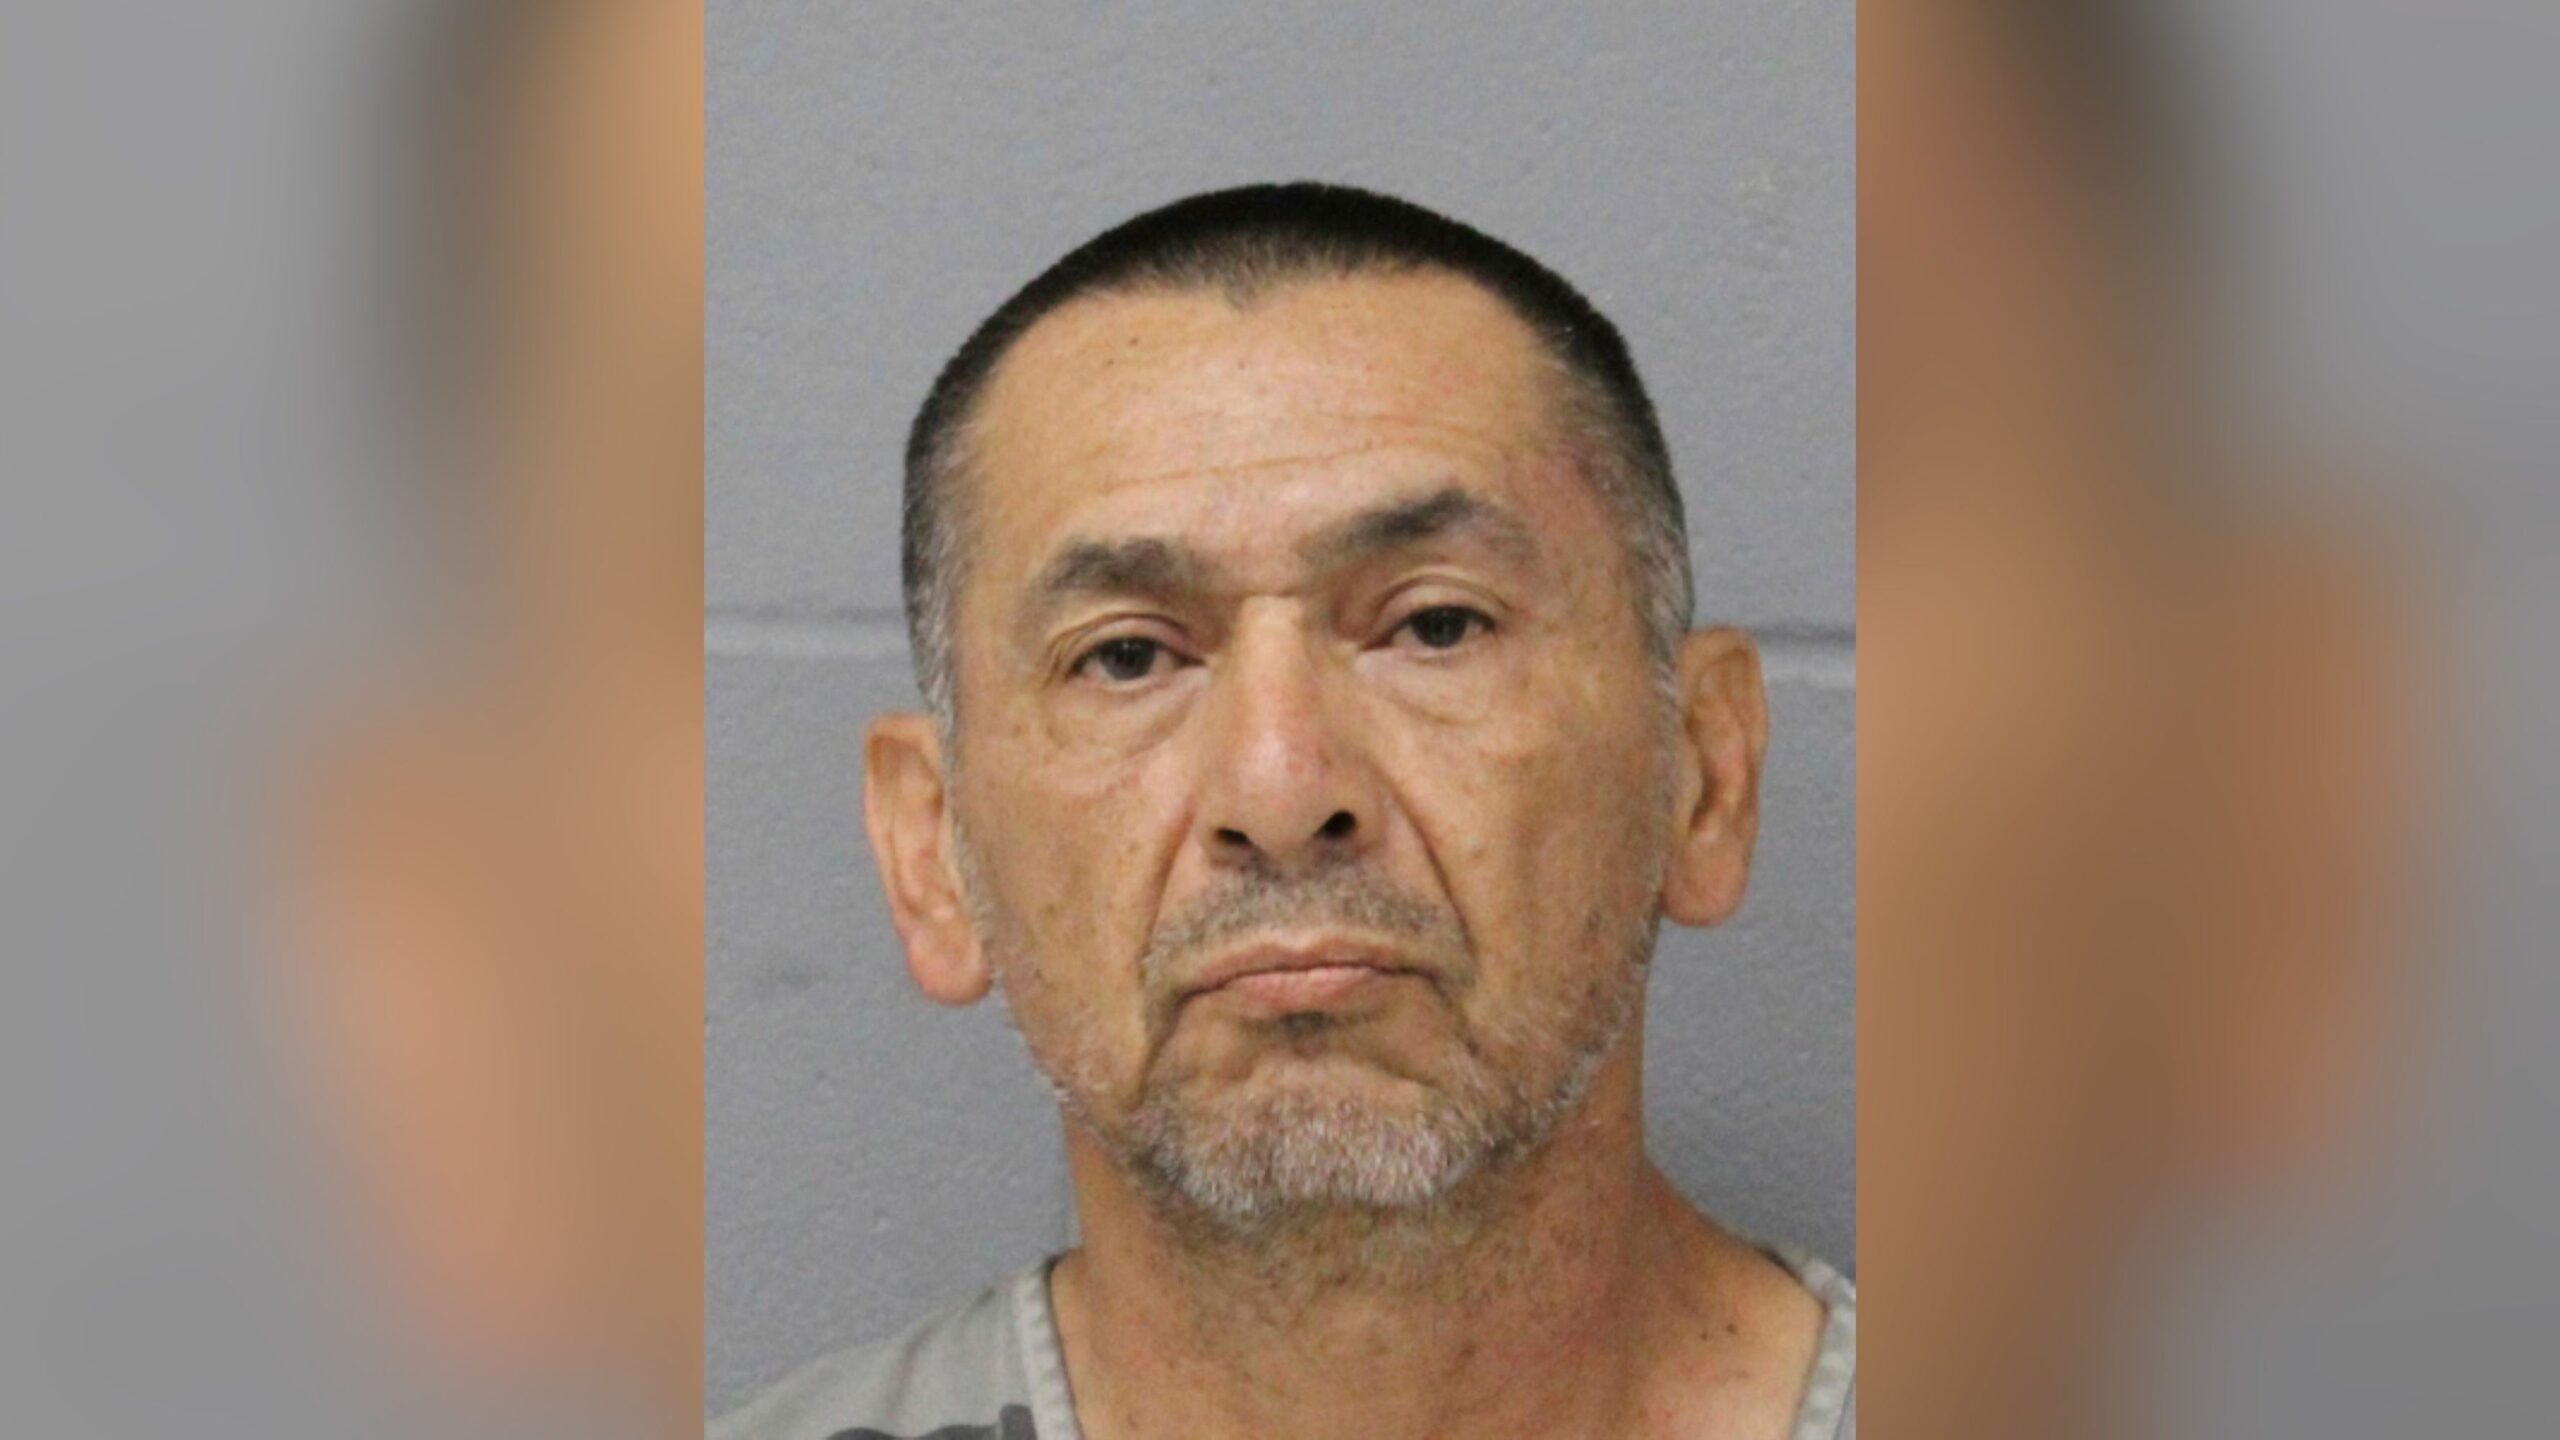 Raul Meza Jr., 62, pictured on May 29, called police on May 24 and confessed to killing his 80-year...